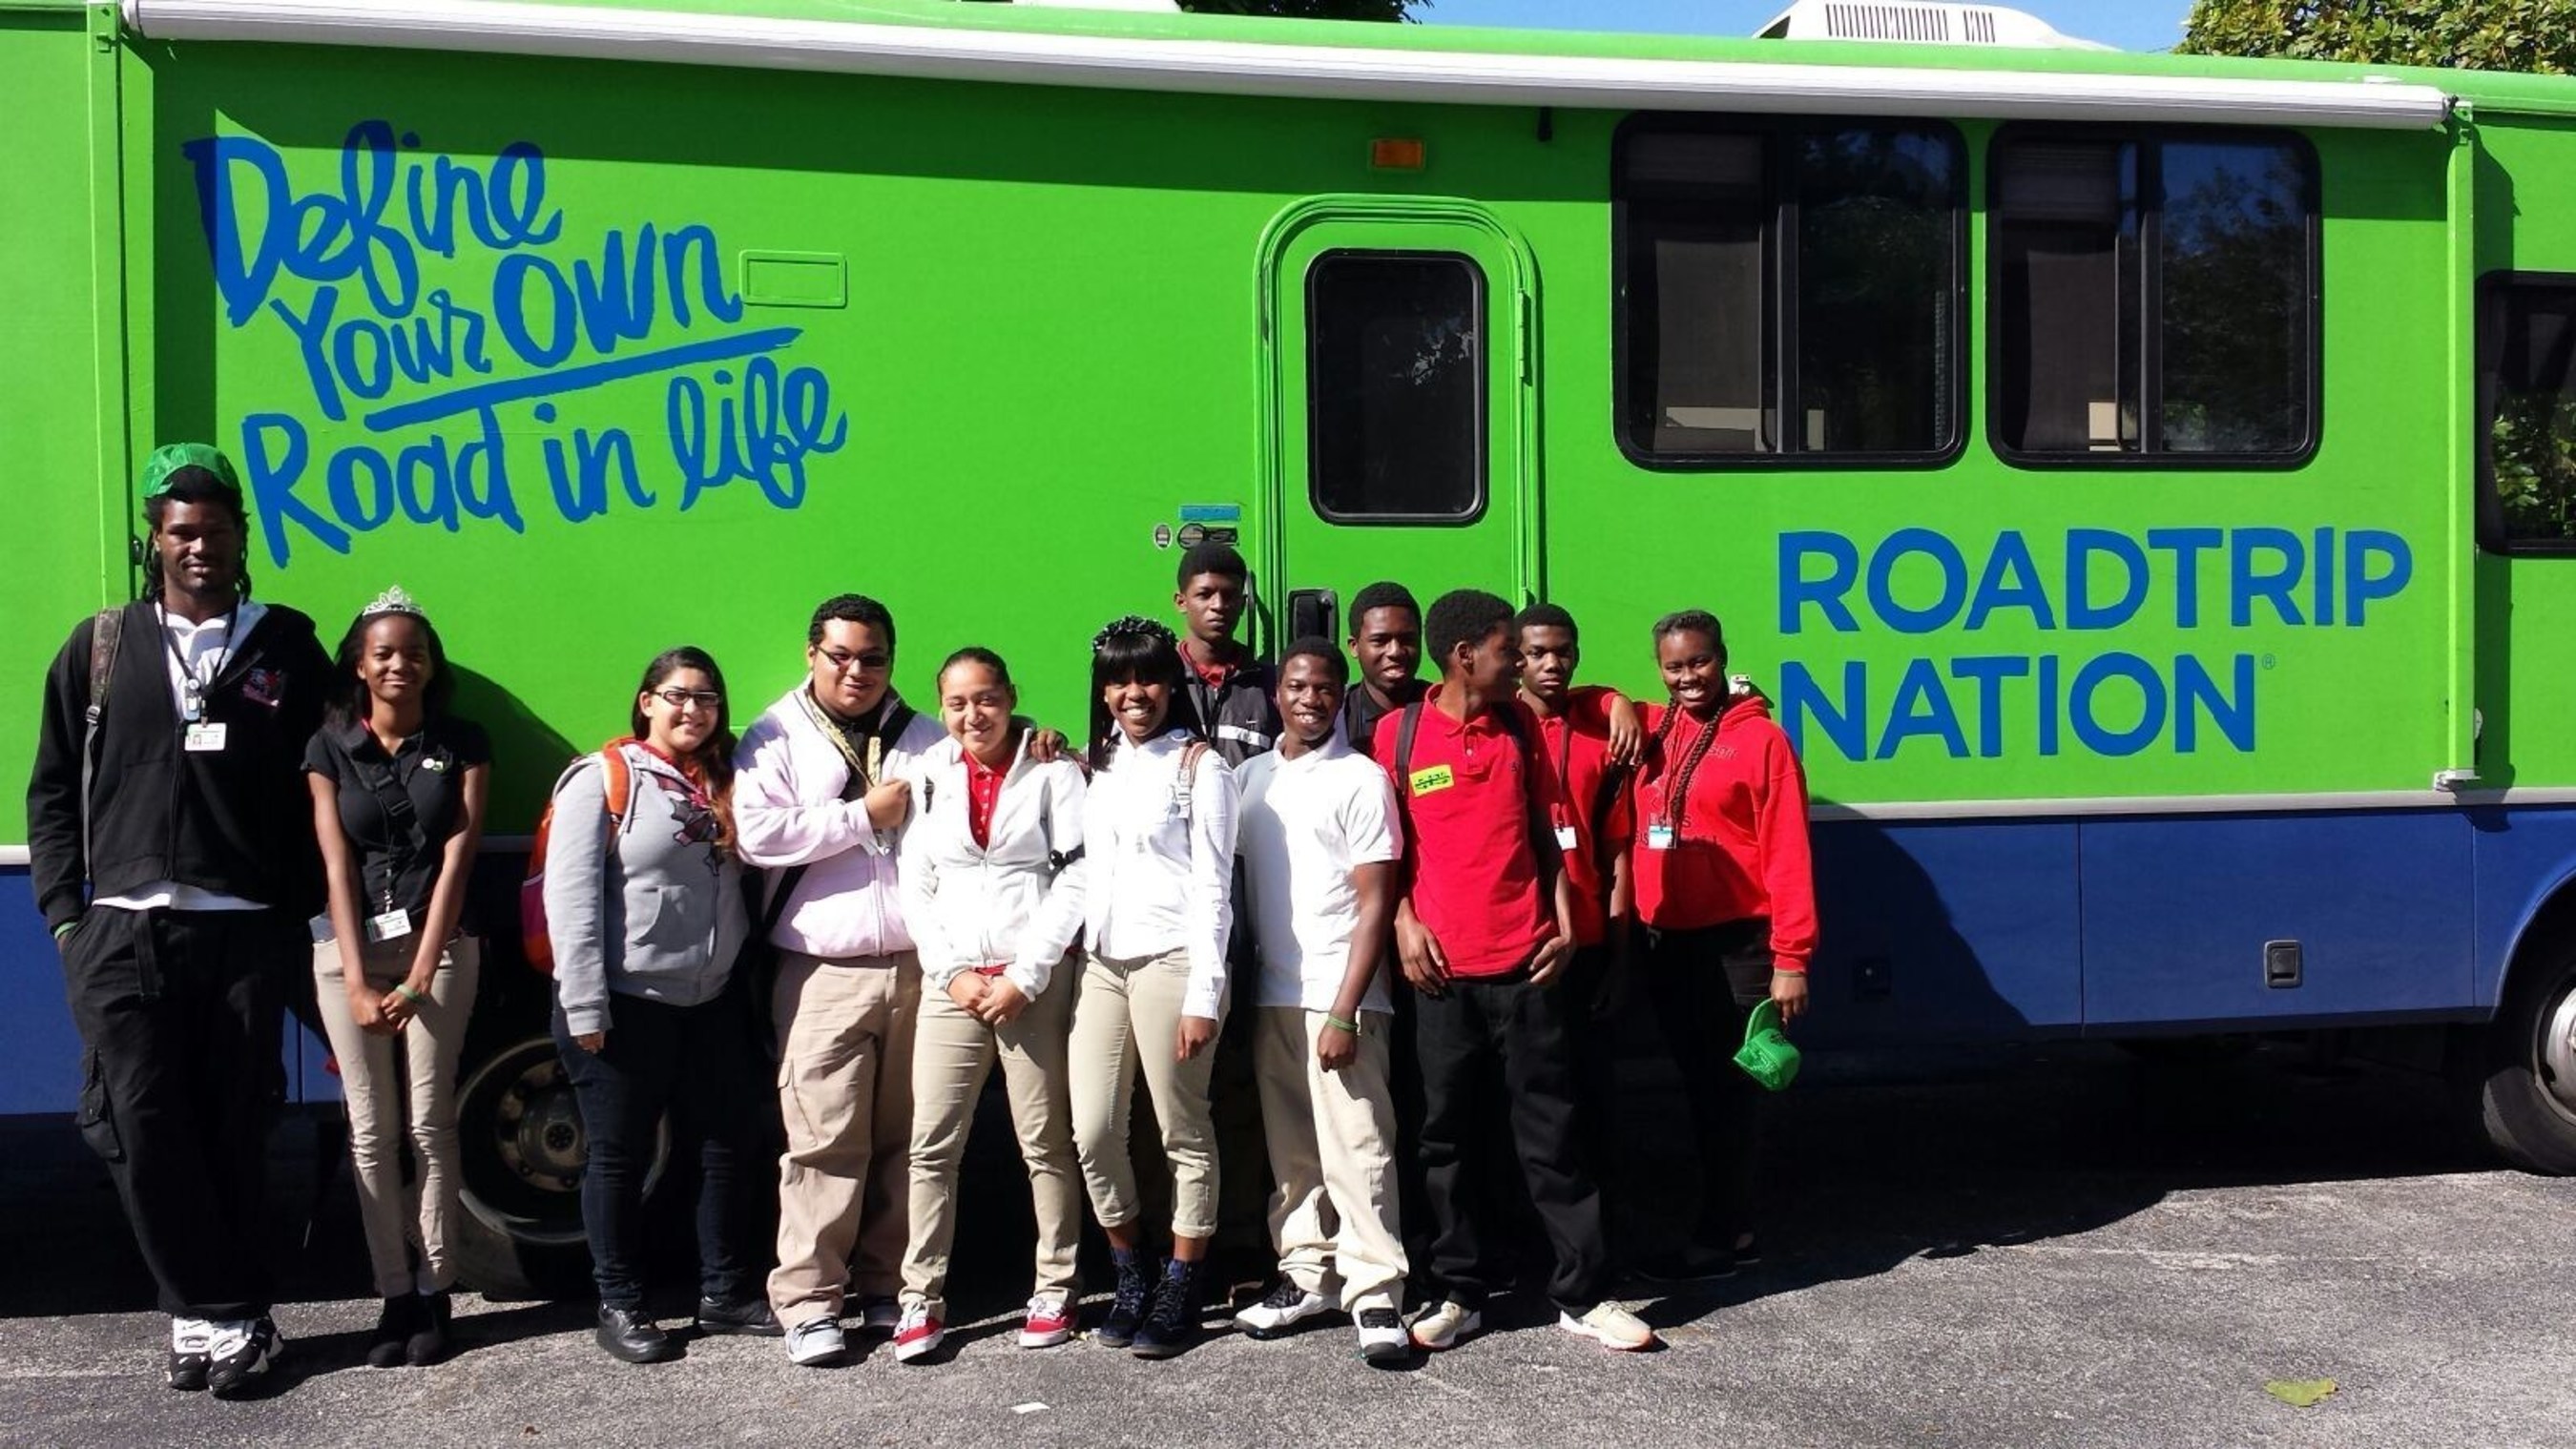 Take Stock in Children hosts student career exploration with Roadtrip Nation in Miami